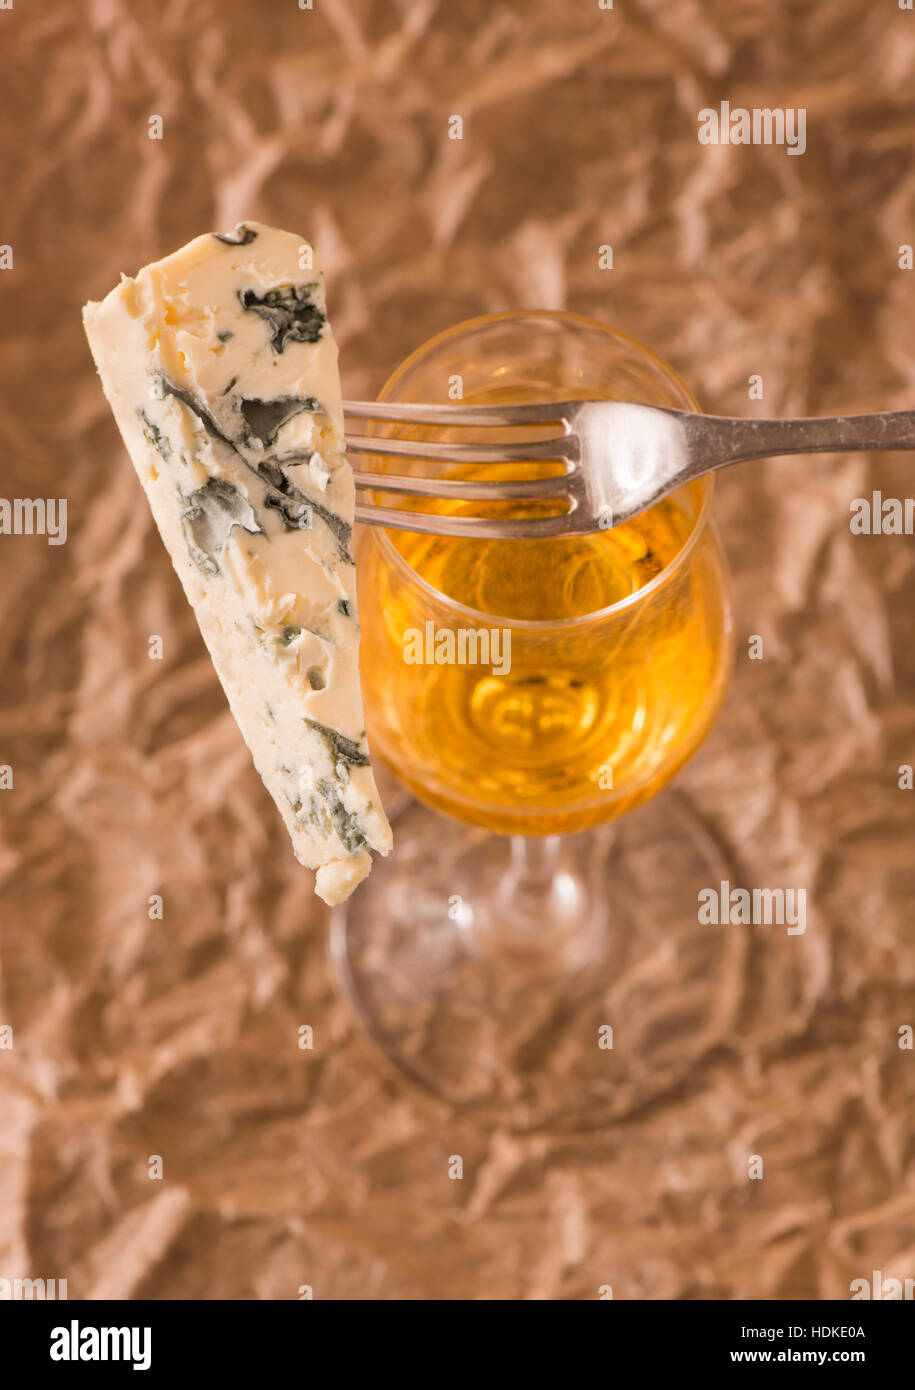 Blue cheese and white dessert wine in glass. Rustic french food as snack or appetizer. Stock Photo